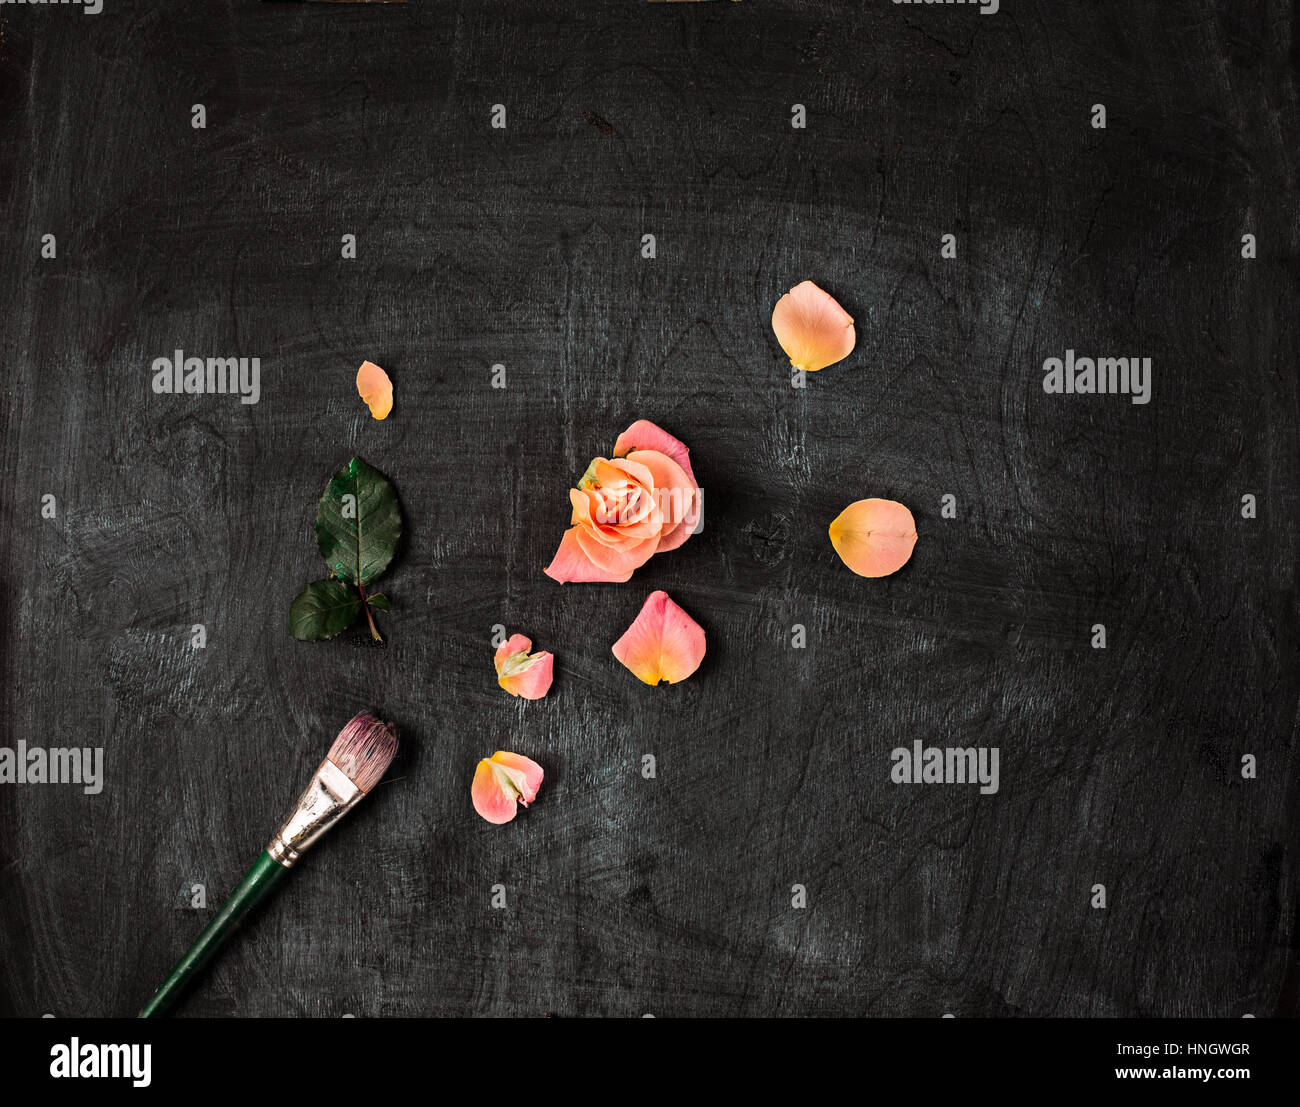 The paint brushe and rose on wooden background Stock Photo